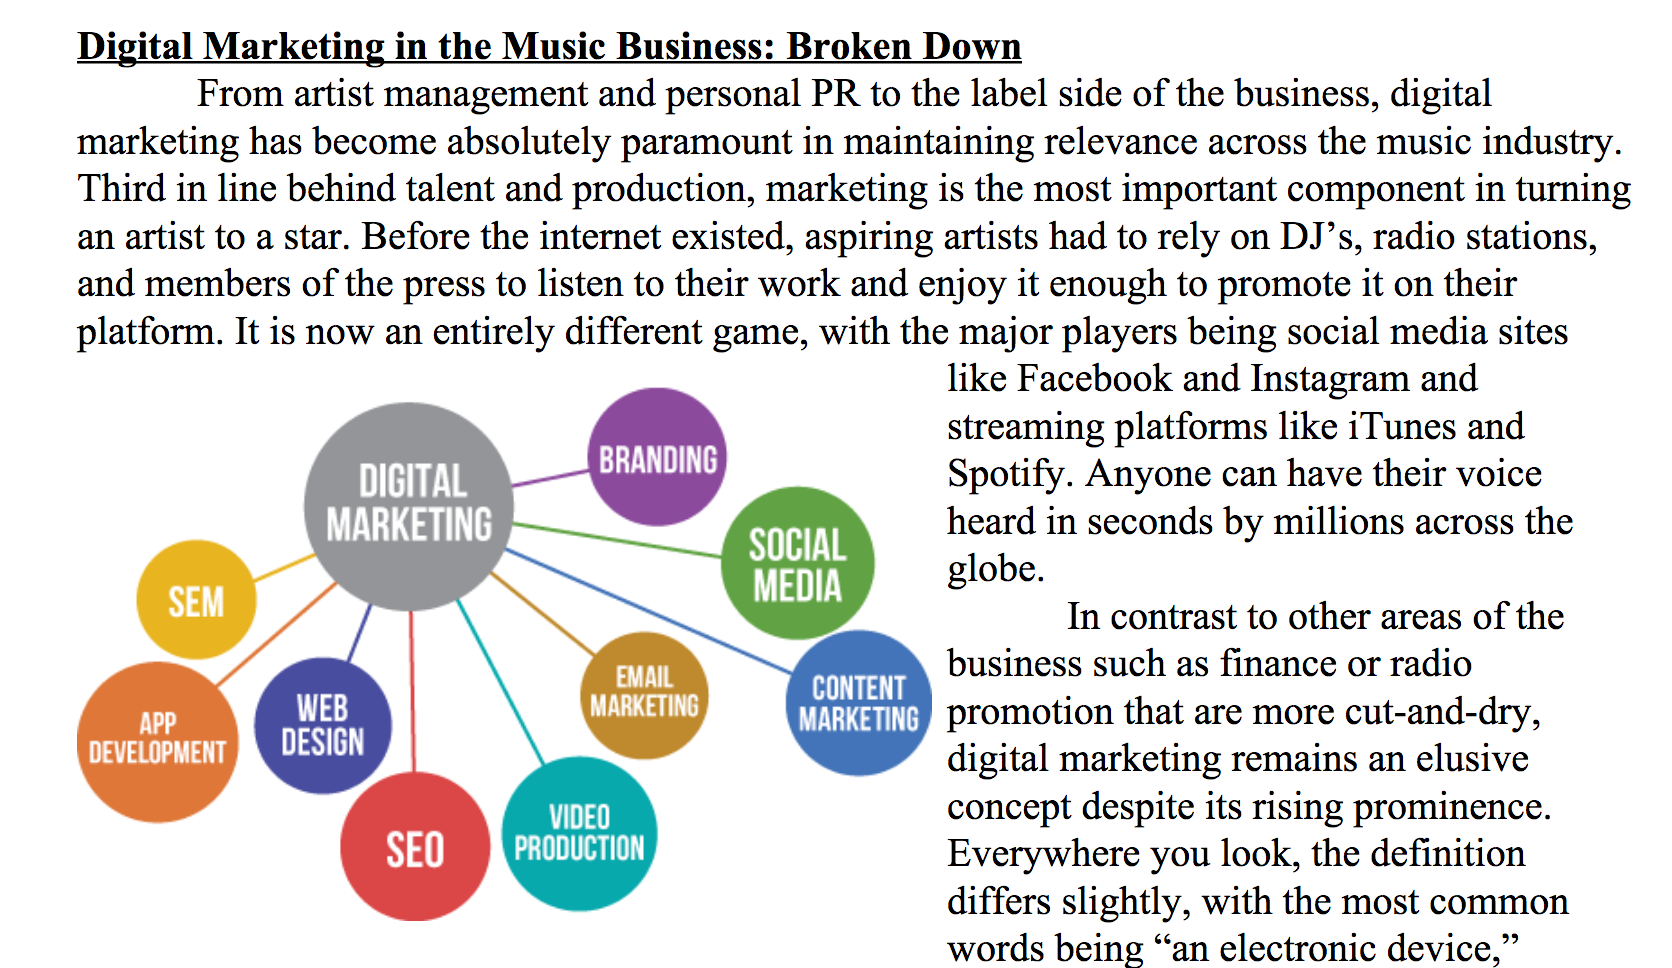 Web marketing for the music business